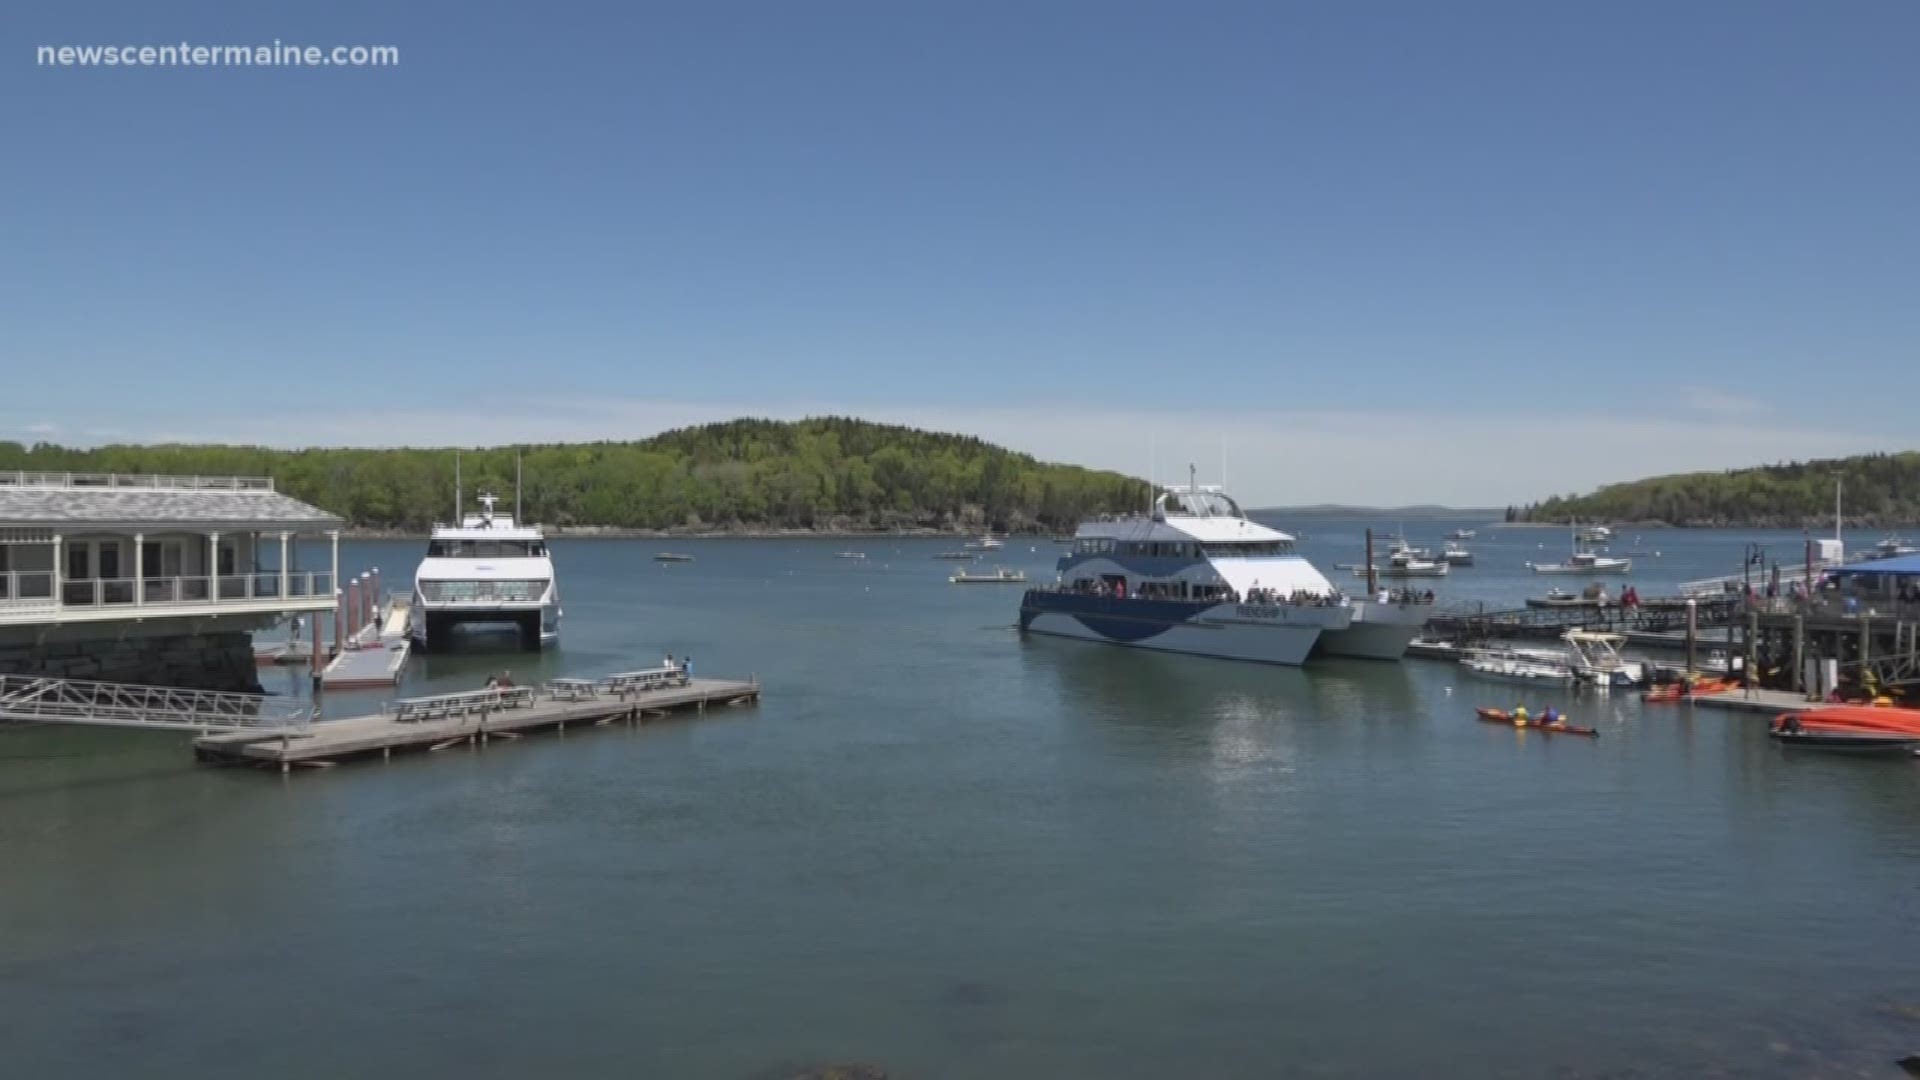 Ongoing construction has delayed the start date for ferry service between Bar Harbor and Nova Scotia.